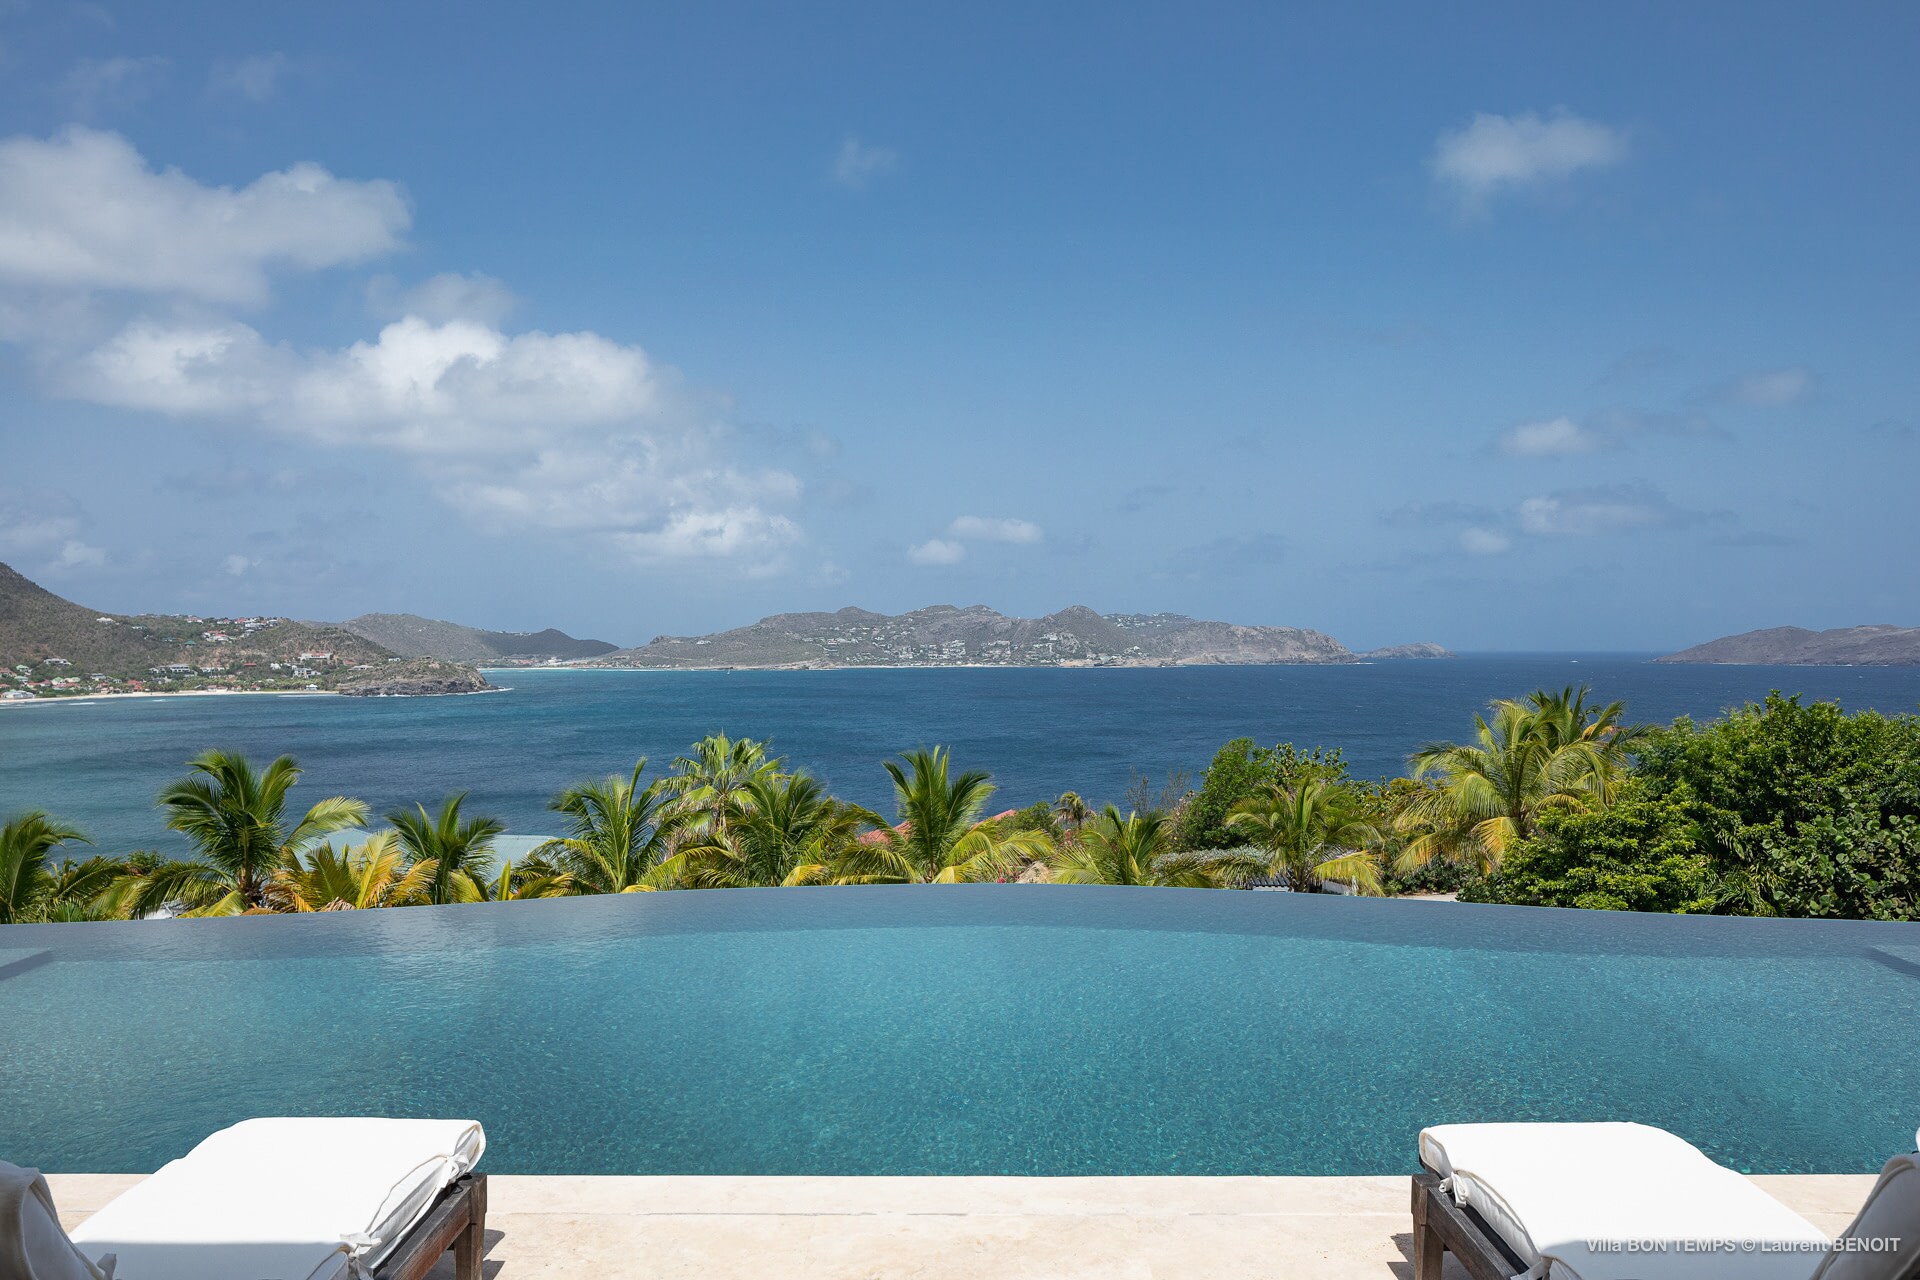 Infinity pool and large covered terrace that runs the length of the villa with dining and lounging areas.&nbsp;